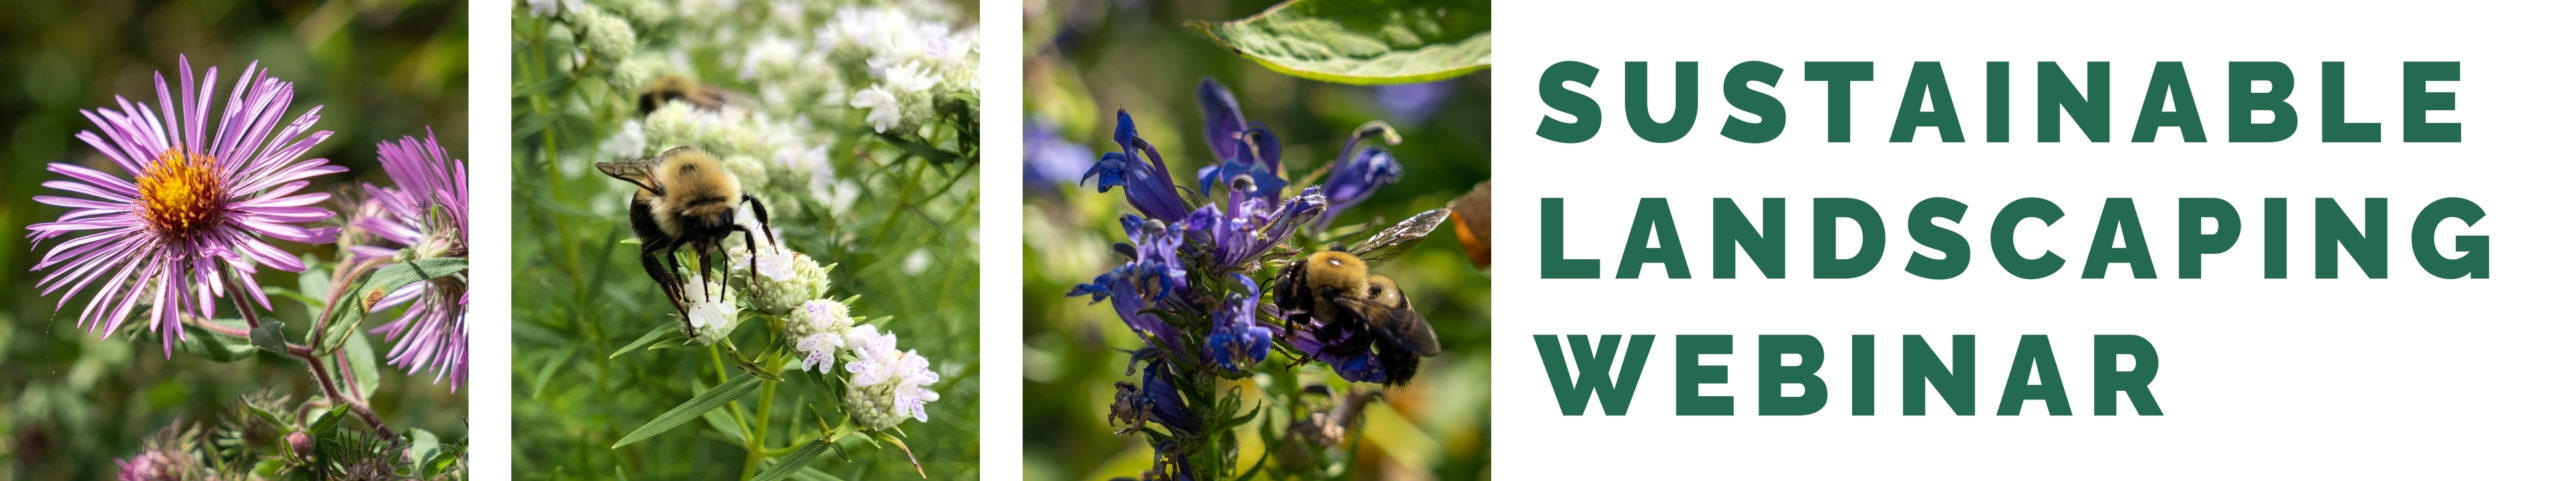 graphic with native flowers and bees with text that says "sustainable landscaping webinar